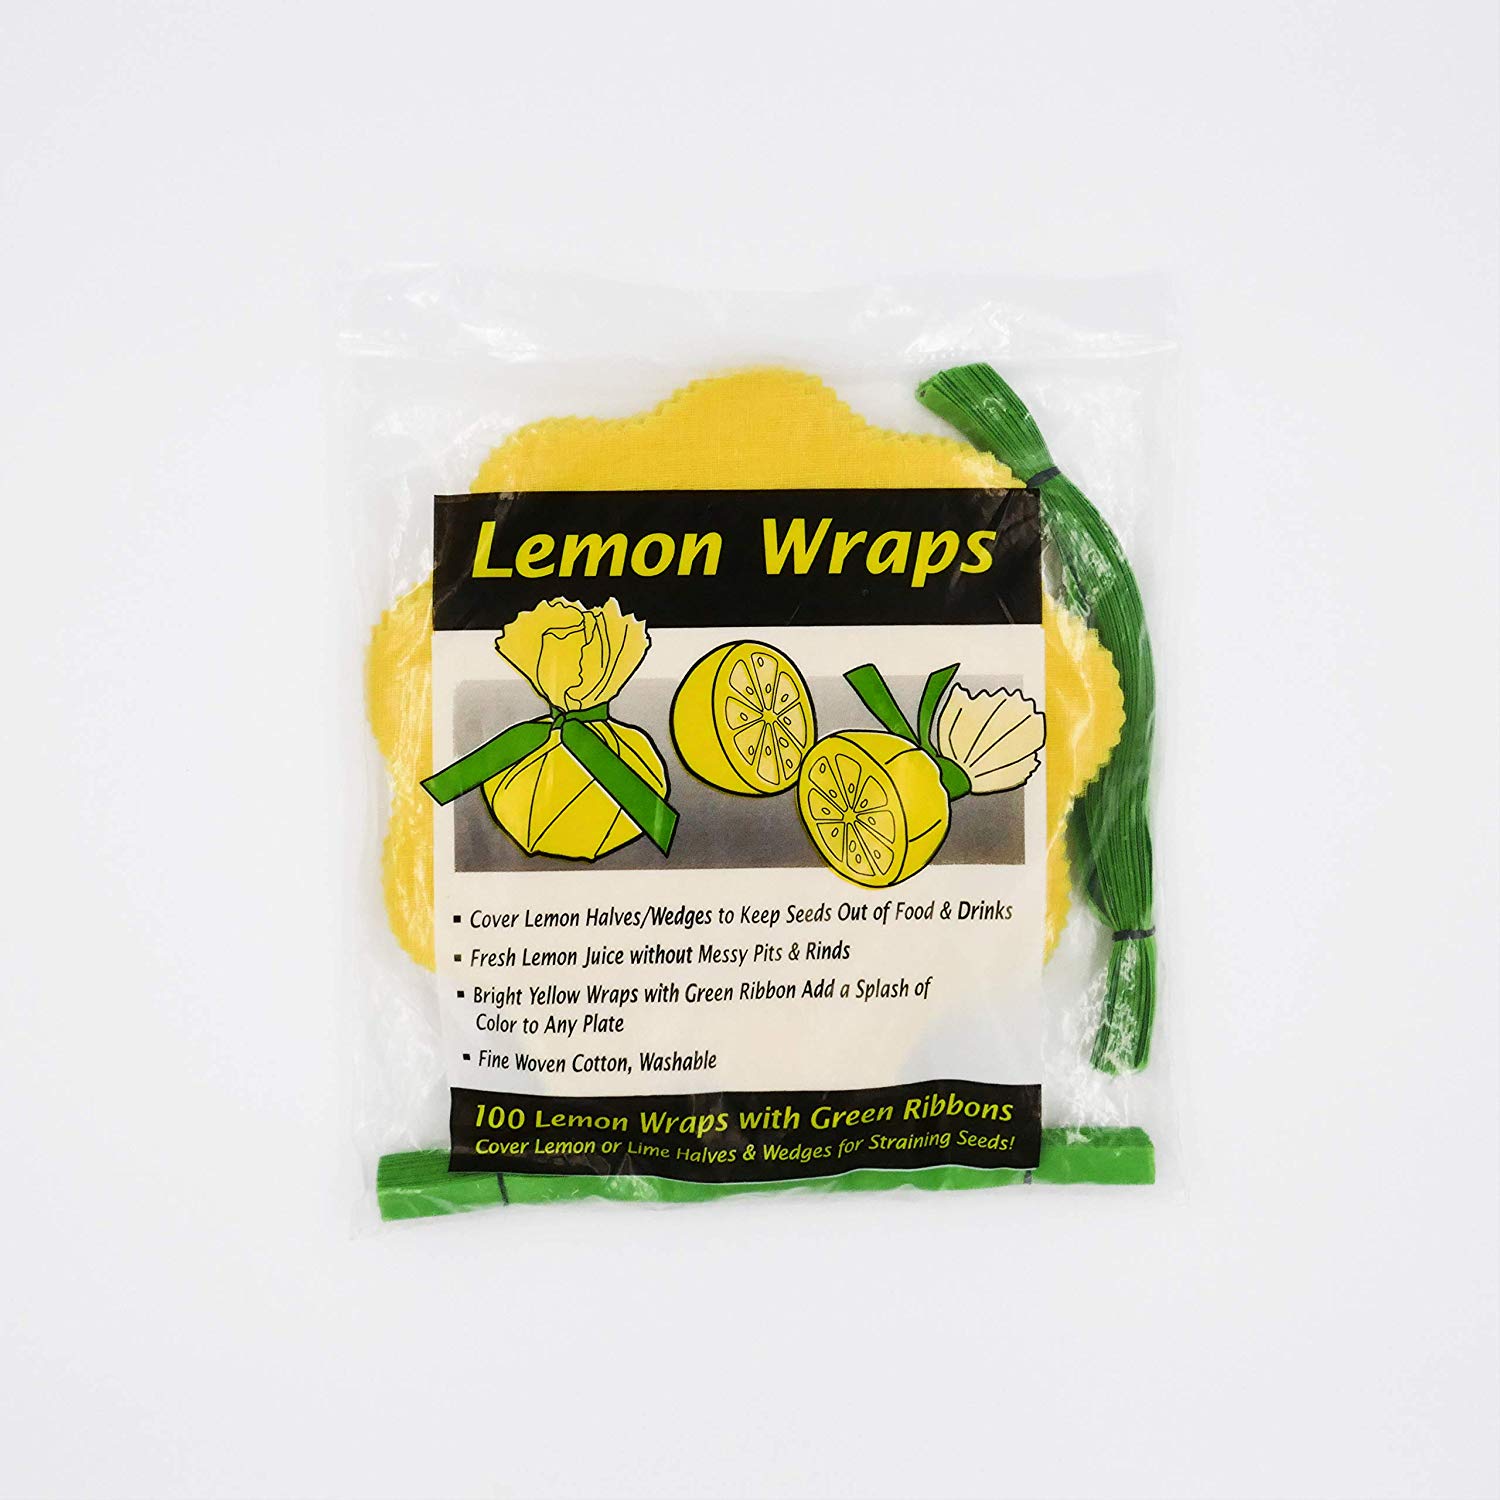 Lemon Wraps - 100 Pack With Green Ribbons